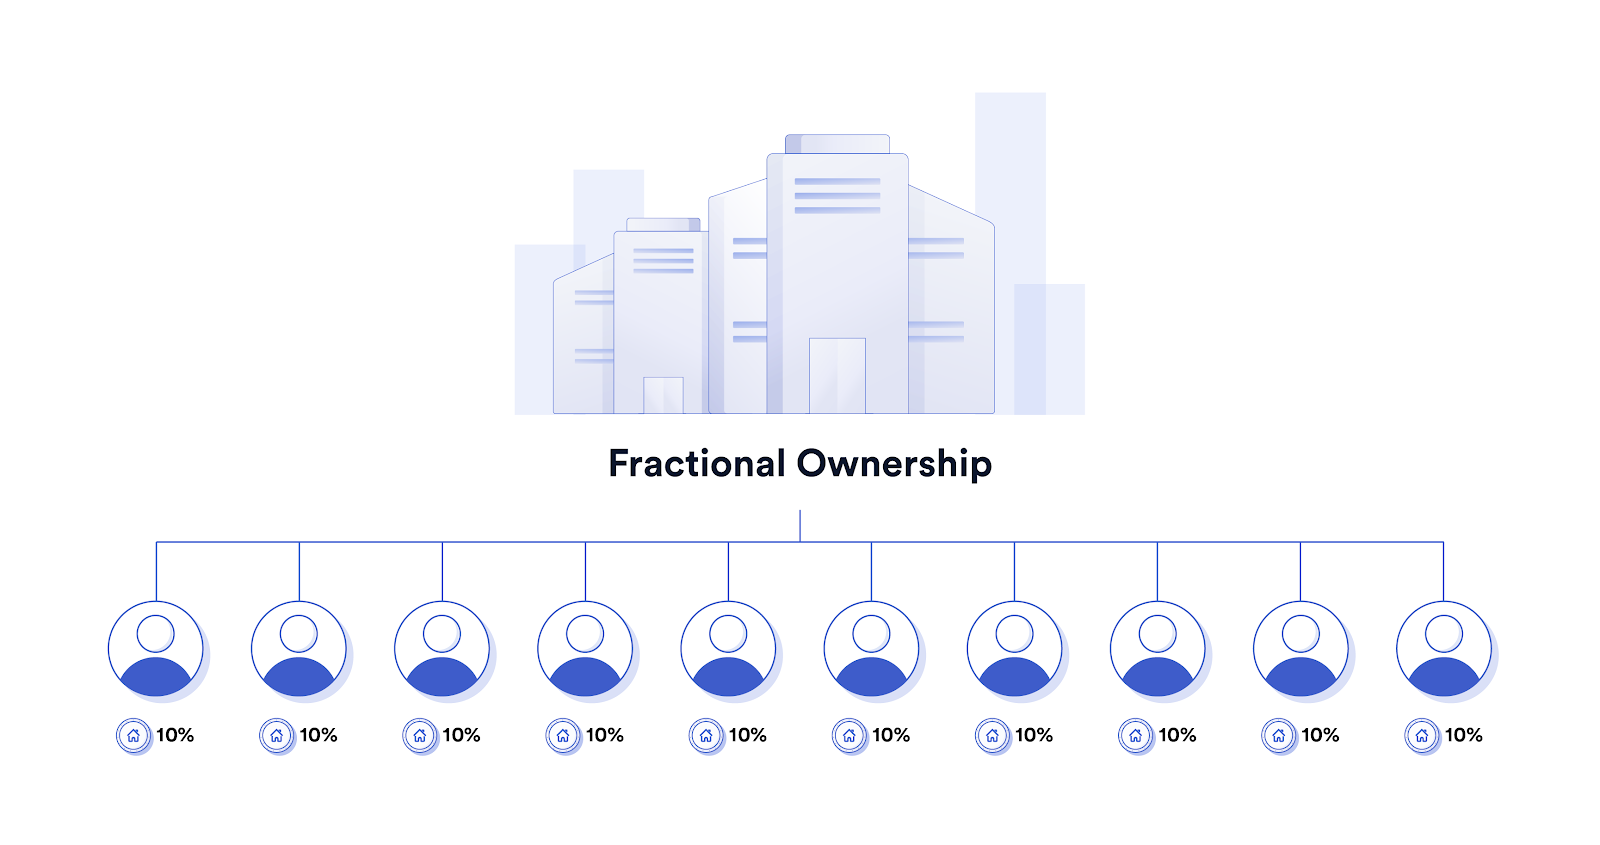 Fractional ownership